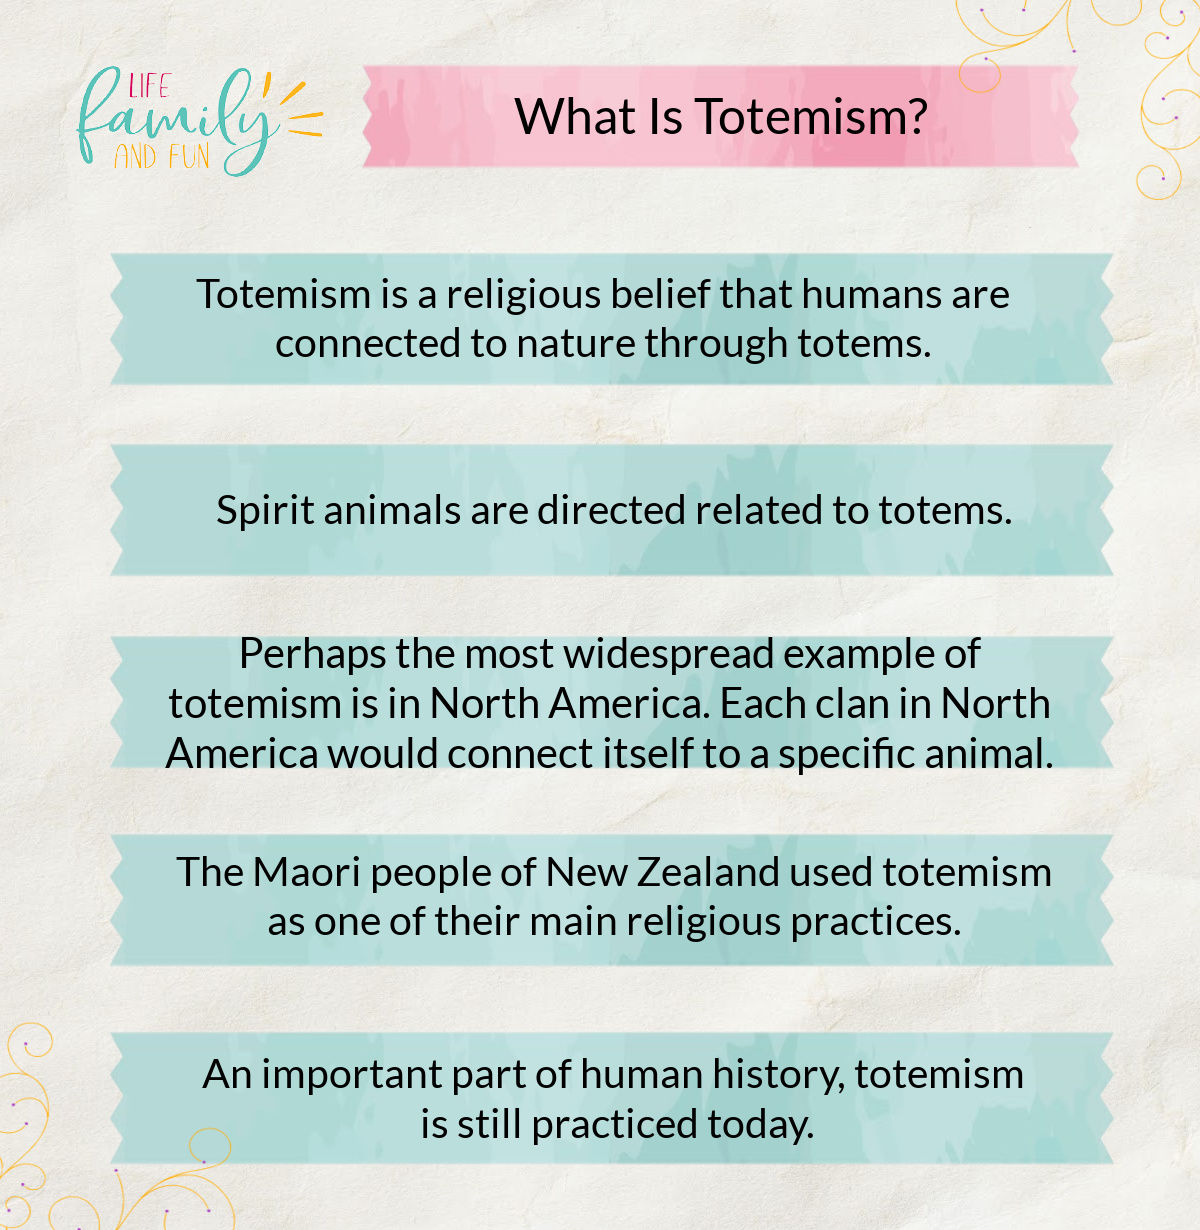 What Is Totemism?